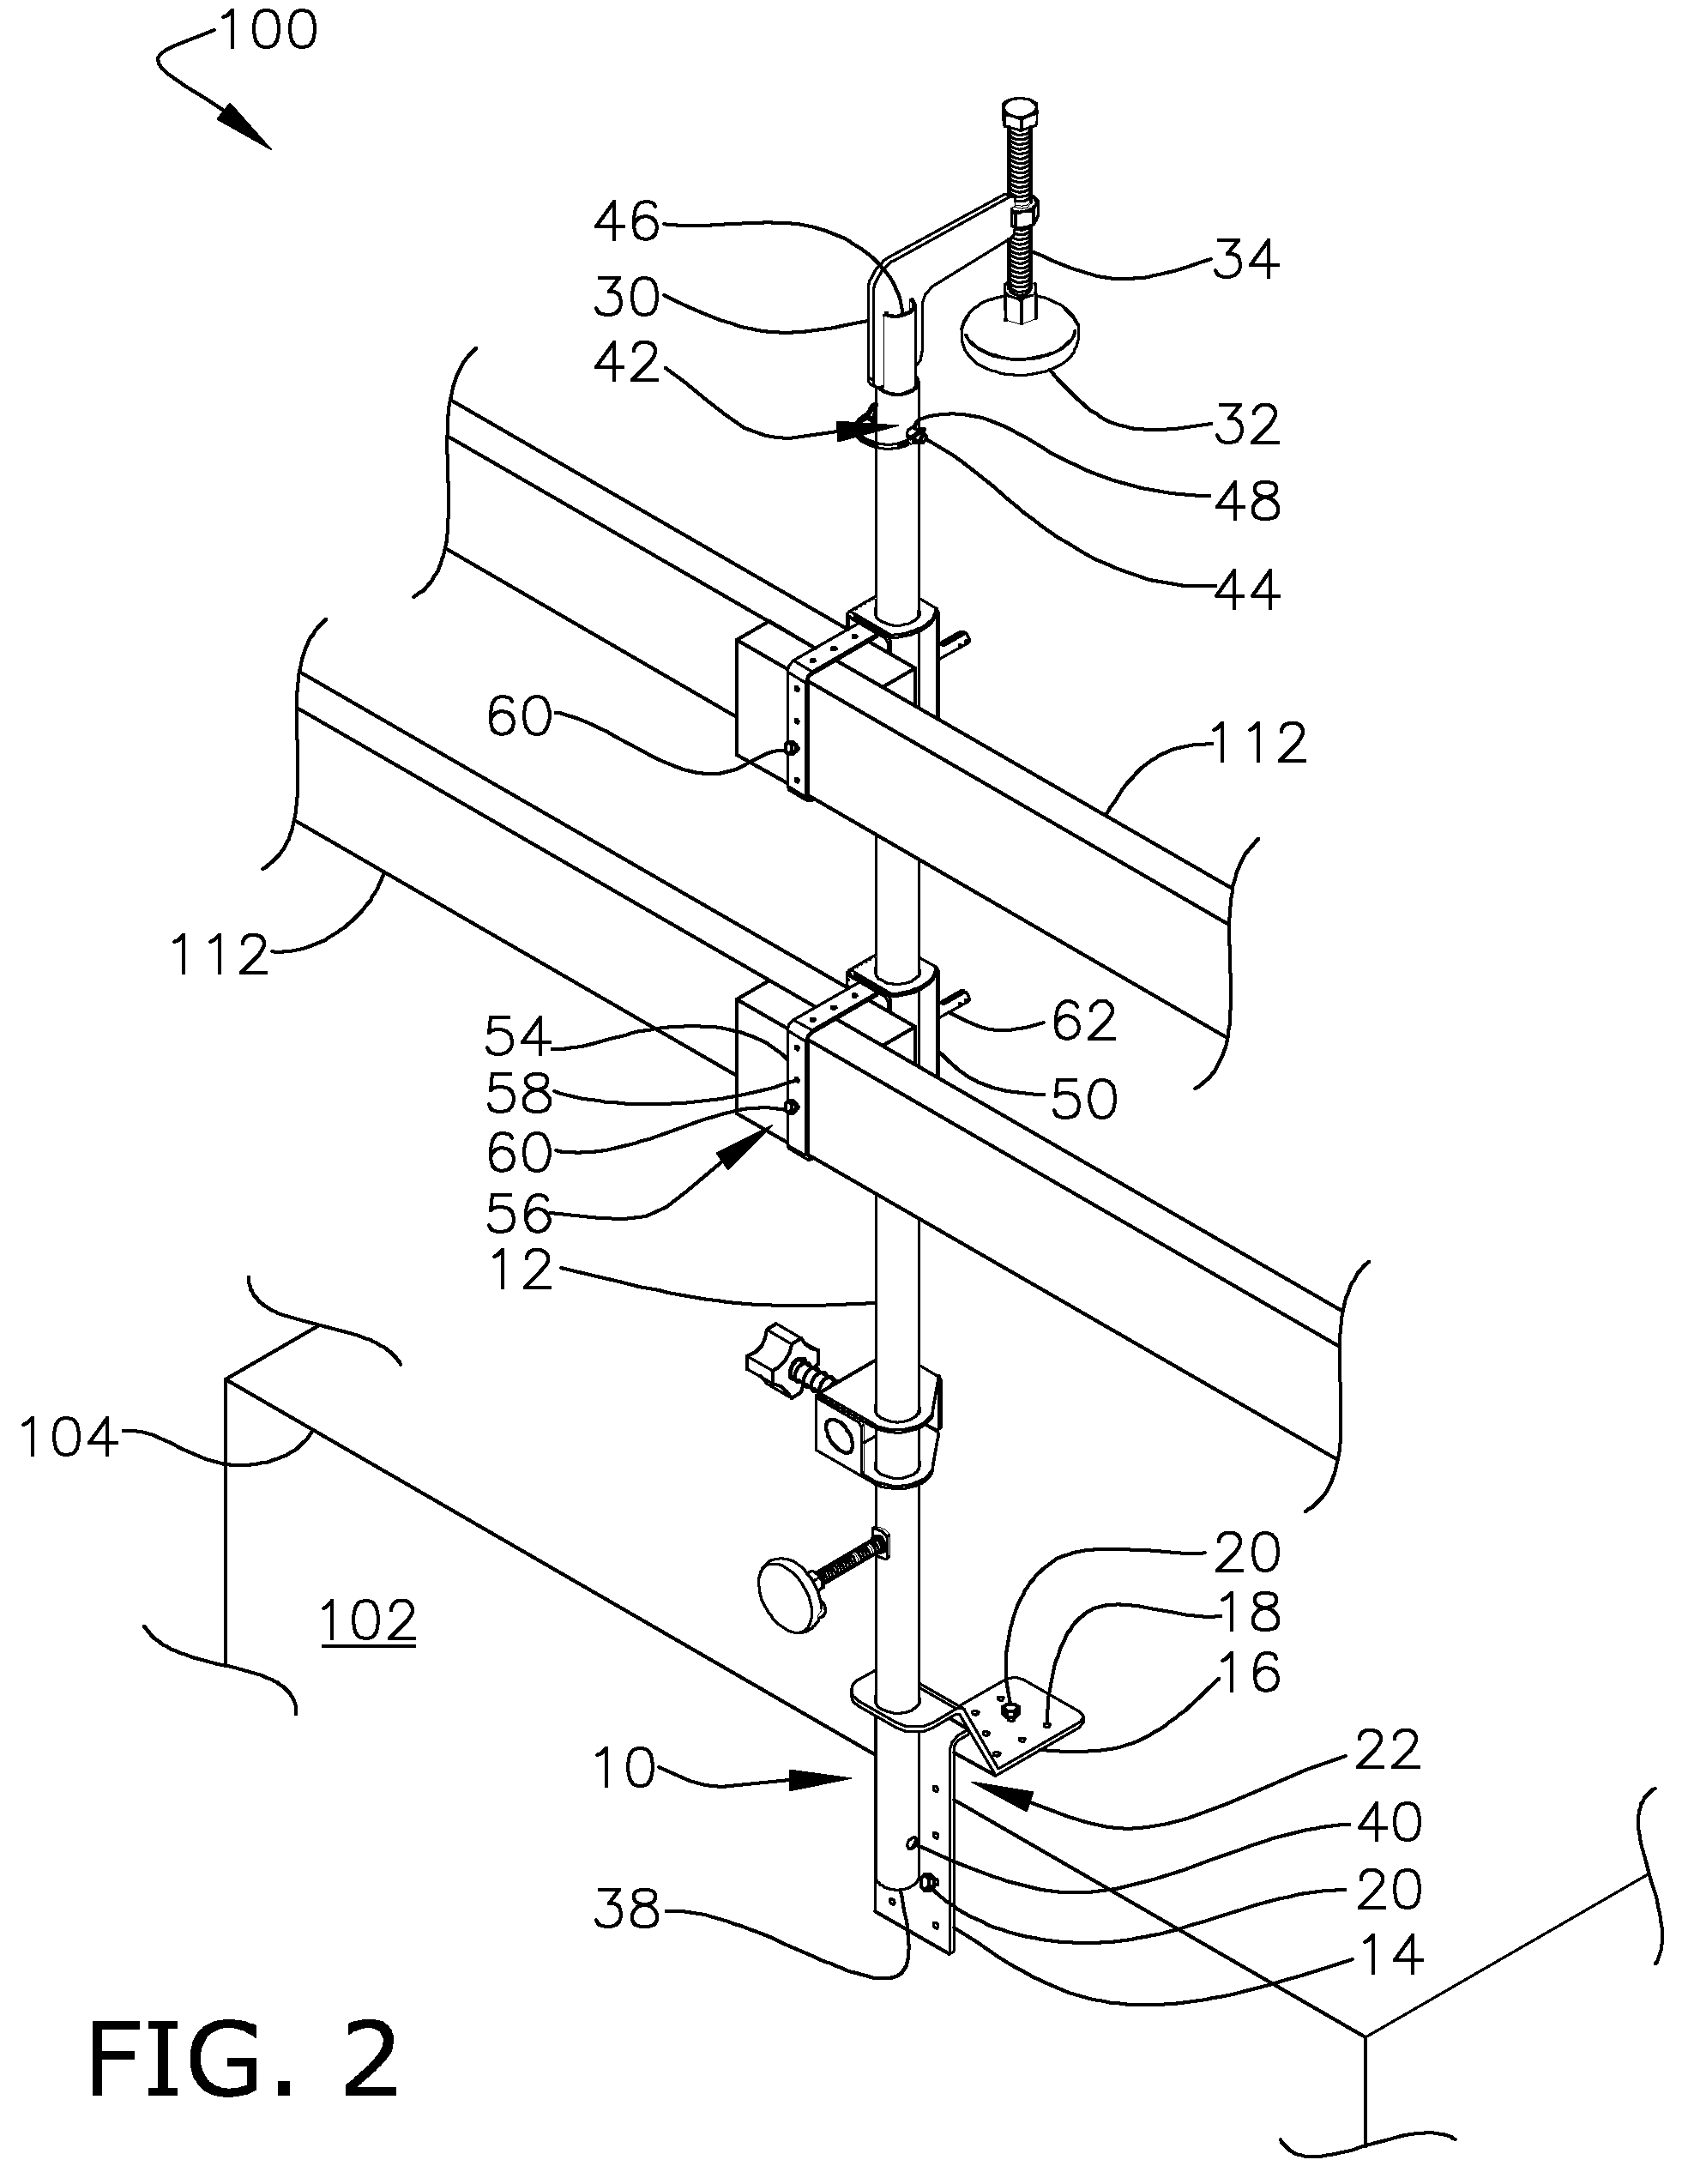 Elevated surface safety base and post apparatus